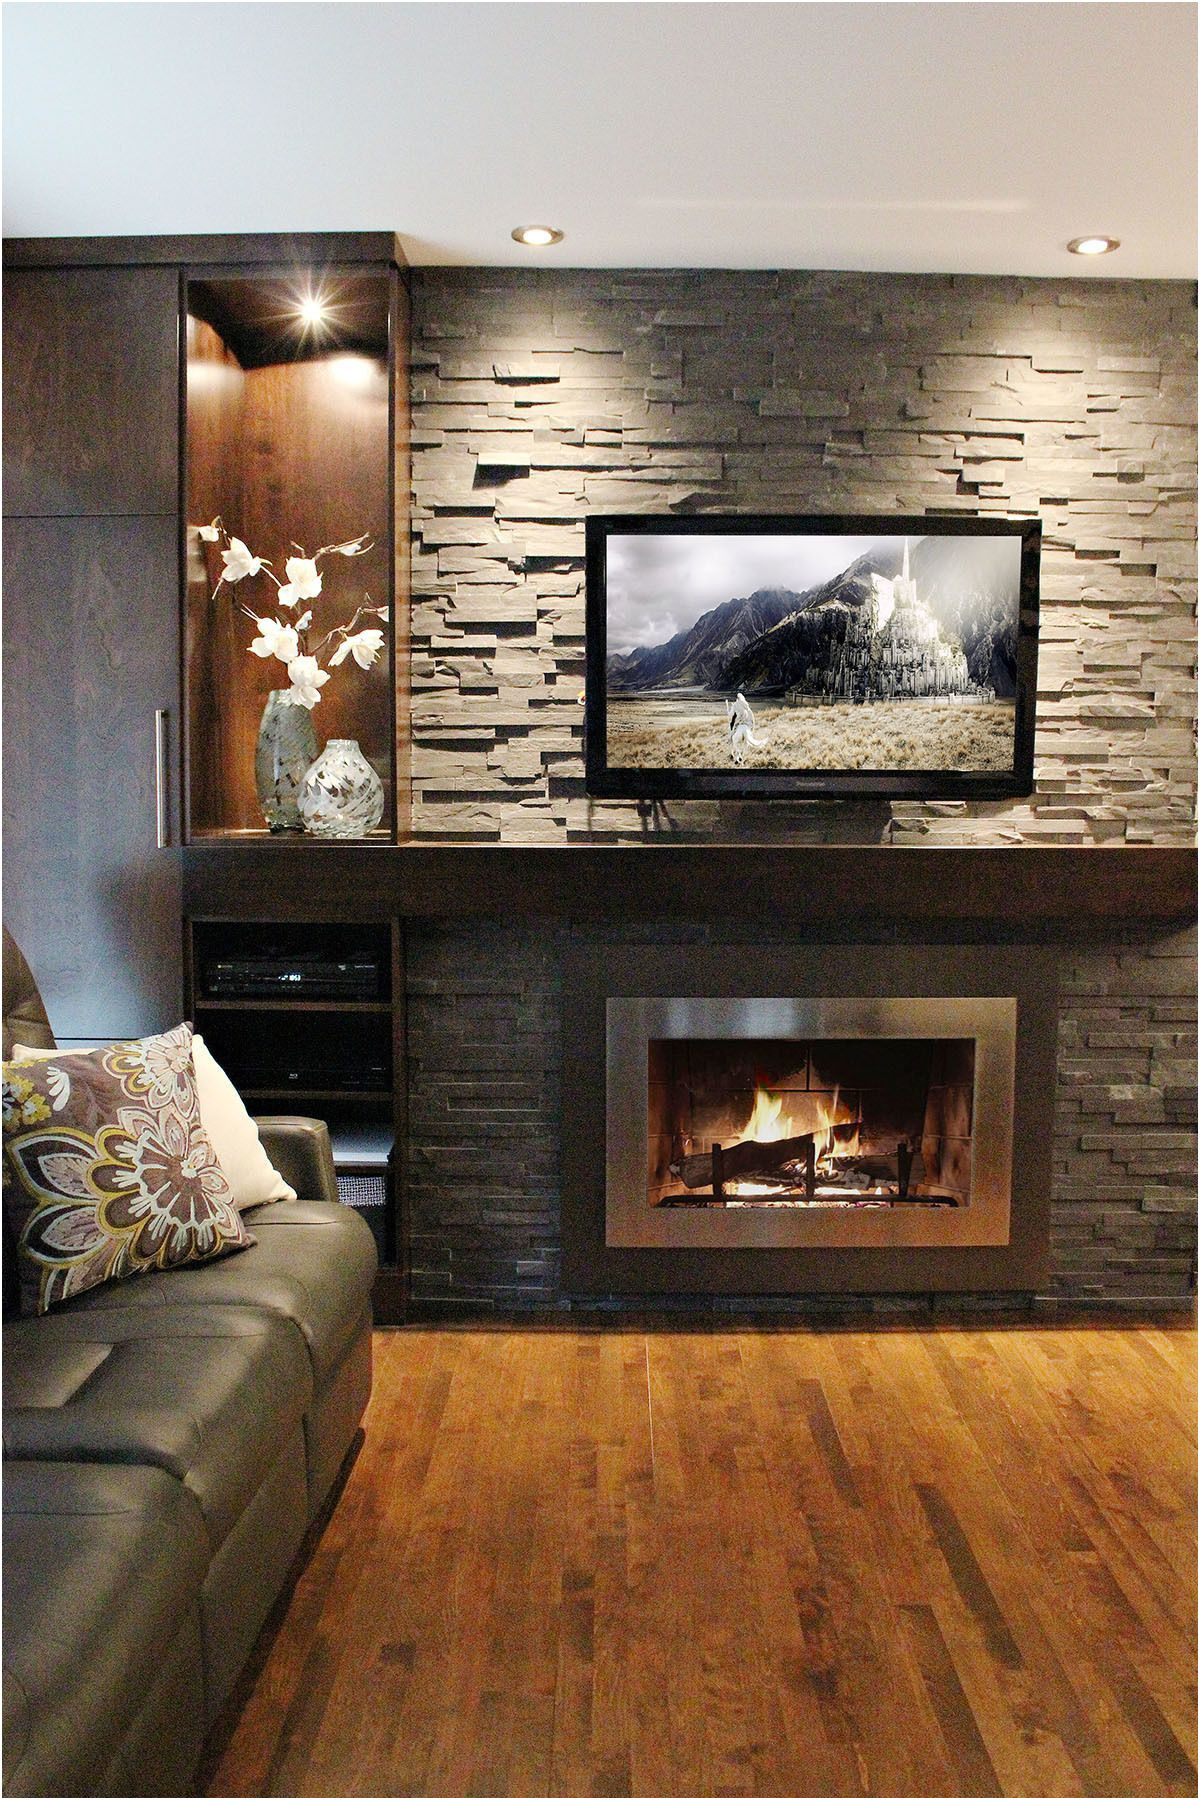 Best Of Fireplace Ideas In Living Room